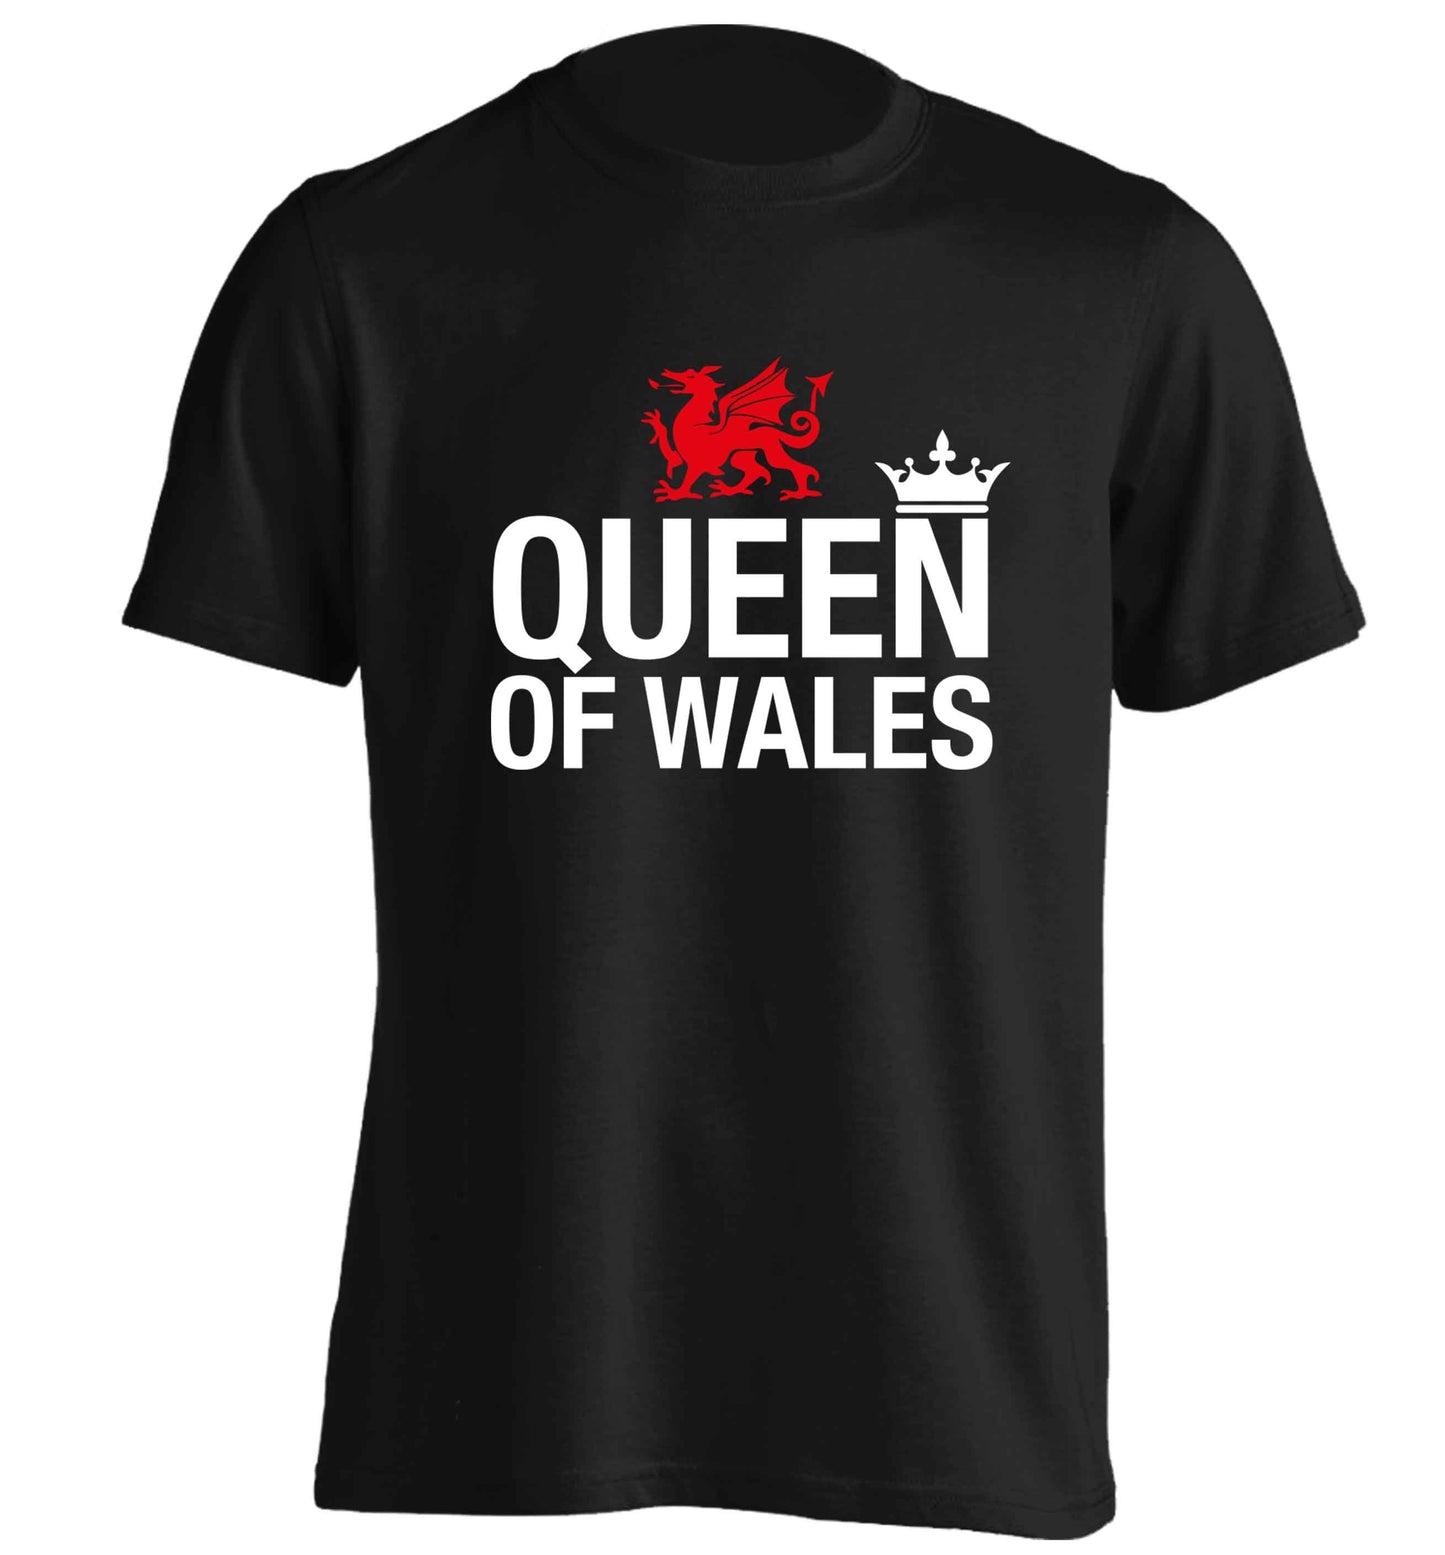 Queen of Wales adults unisex black Tshirt 2XL